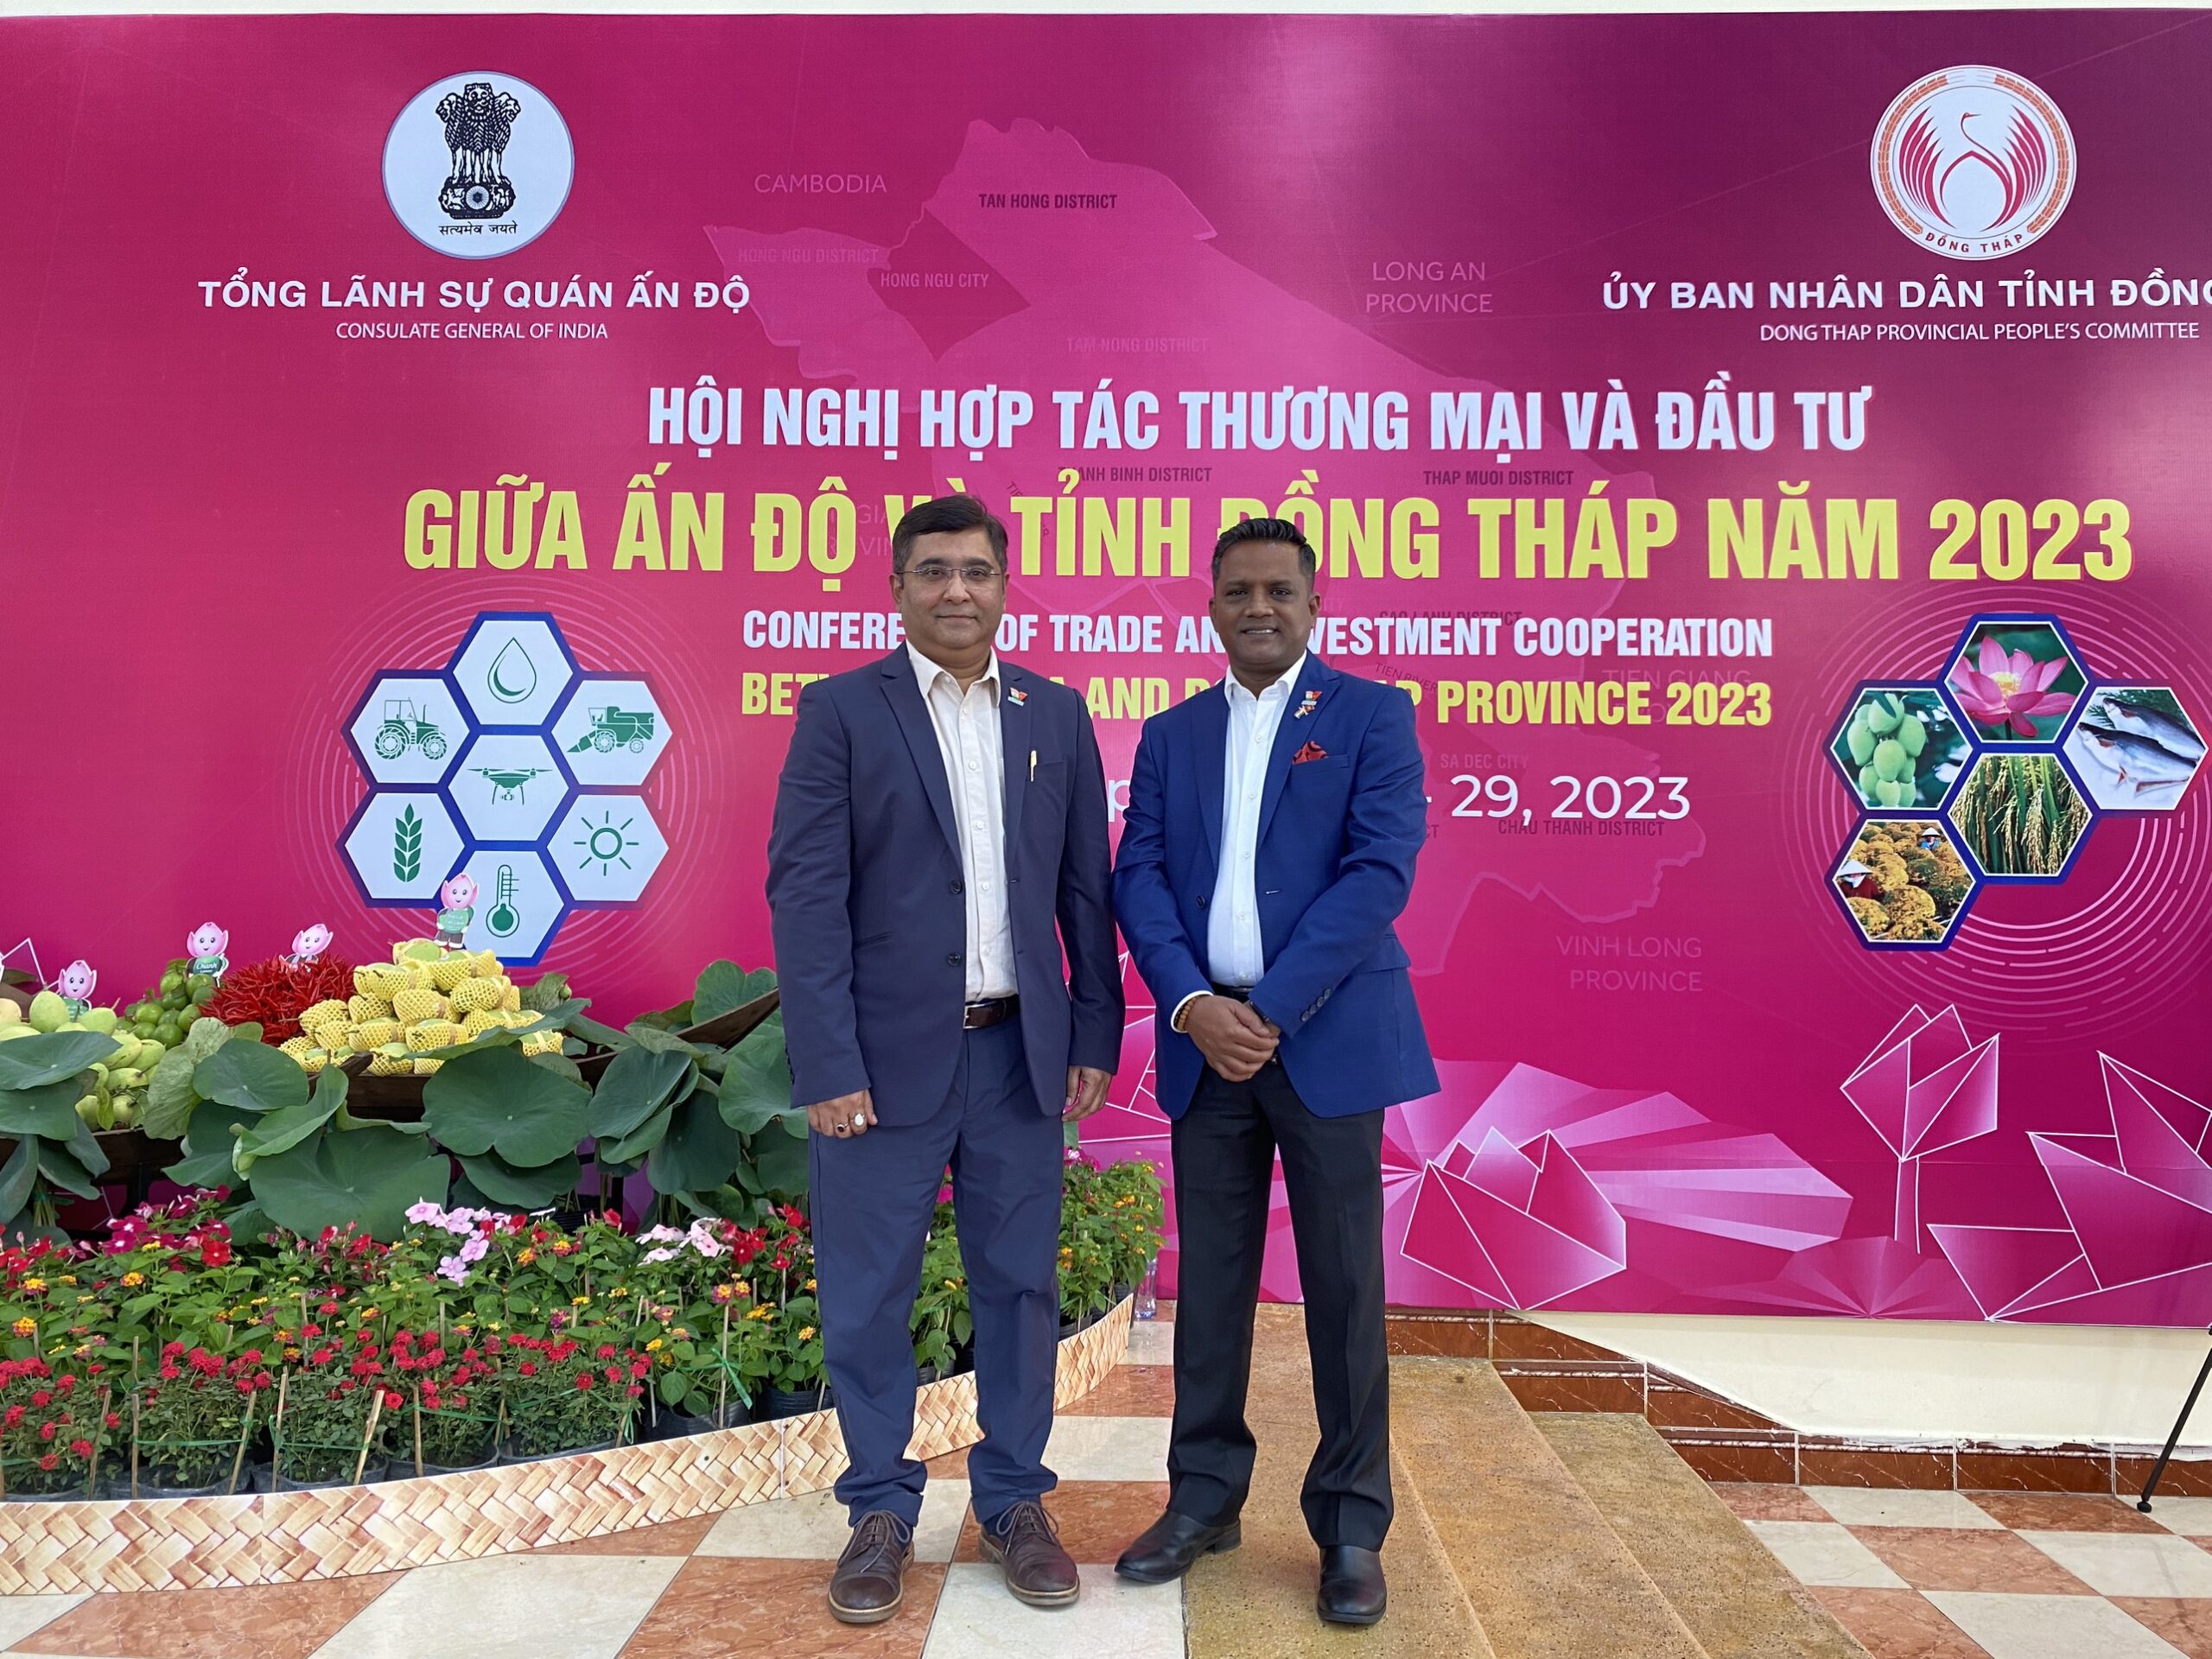 CONFERENCE OF TRADE AND INVESTMENT CORPORATION BETWEEN INDIA AND DONG THAP PROVINCE 2023